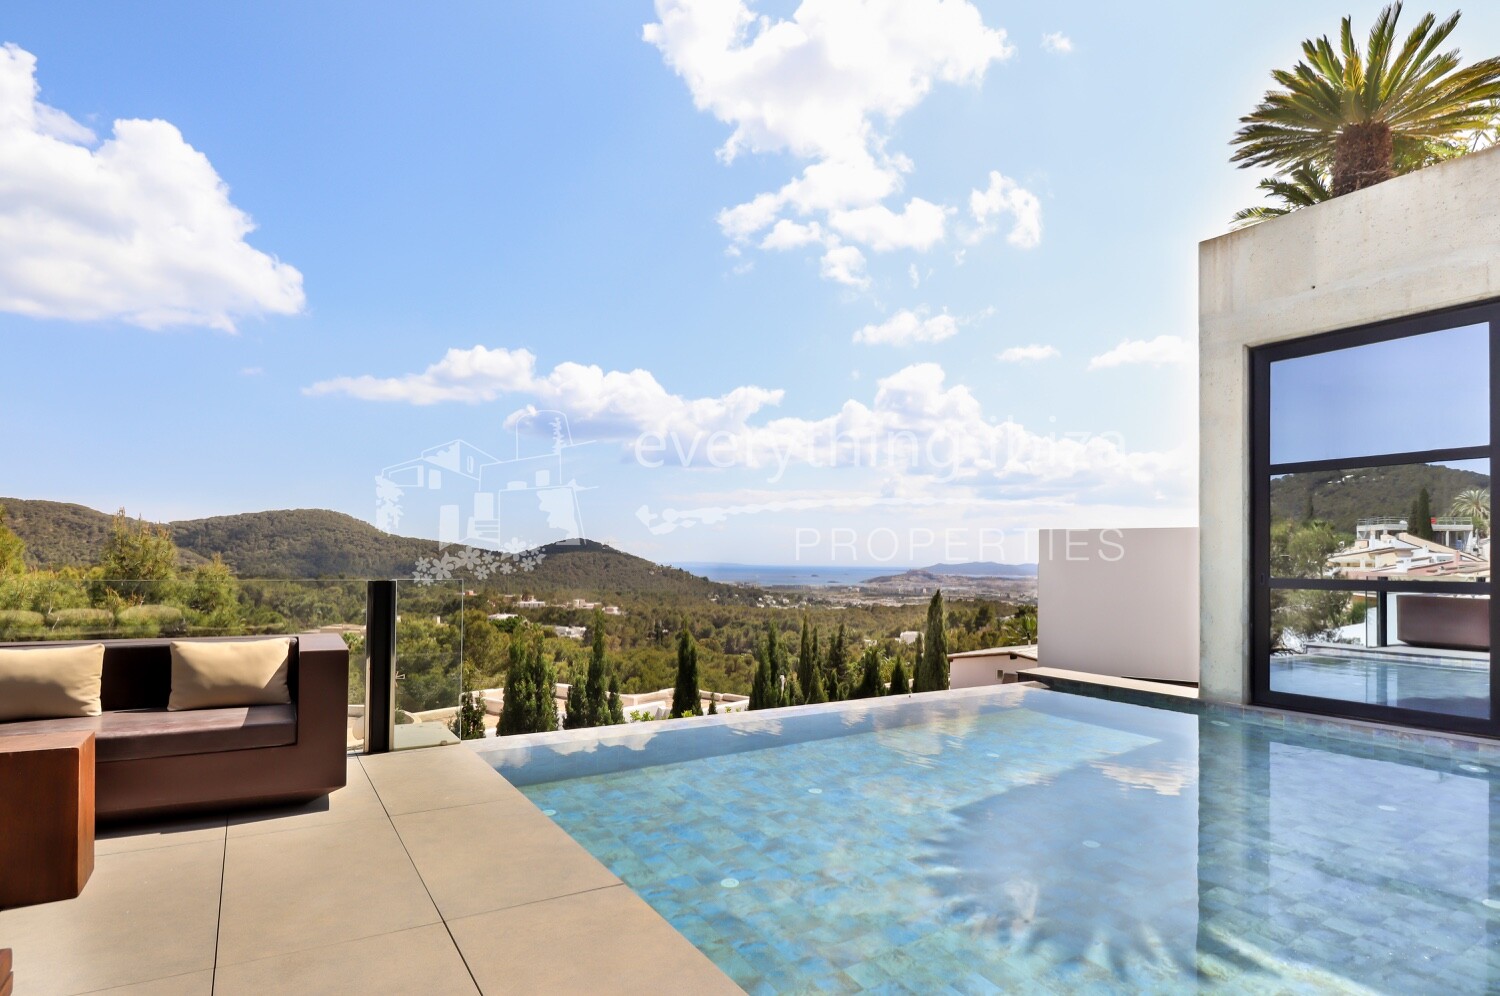 Designer Contemporary Villa with Super Views & Tourist License, ref. 1608, for sale in Ibiza by everything ibiza Properties